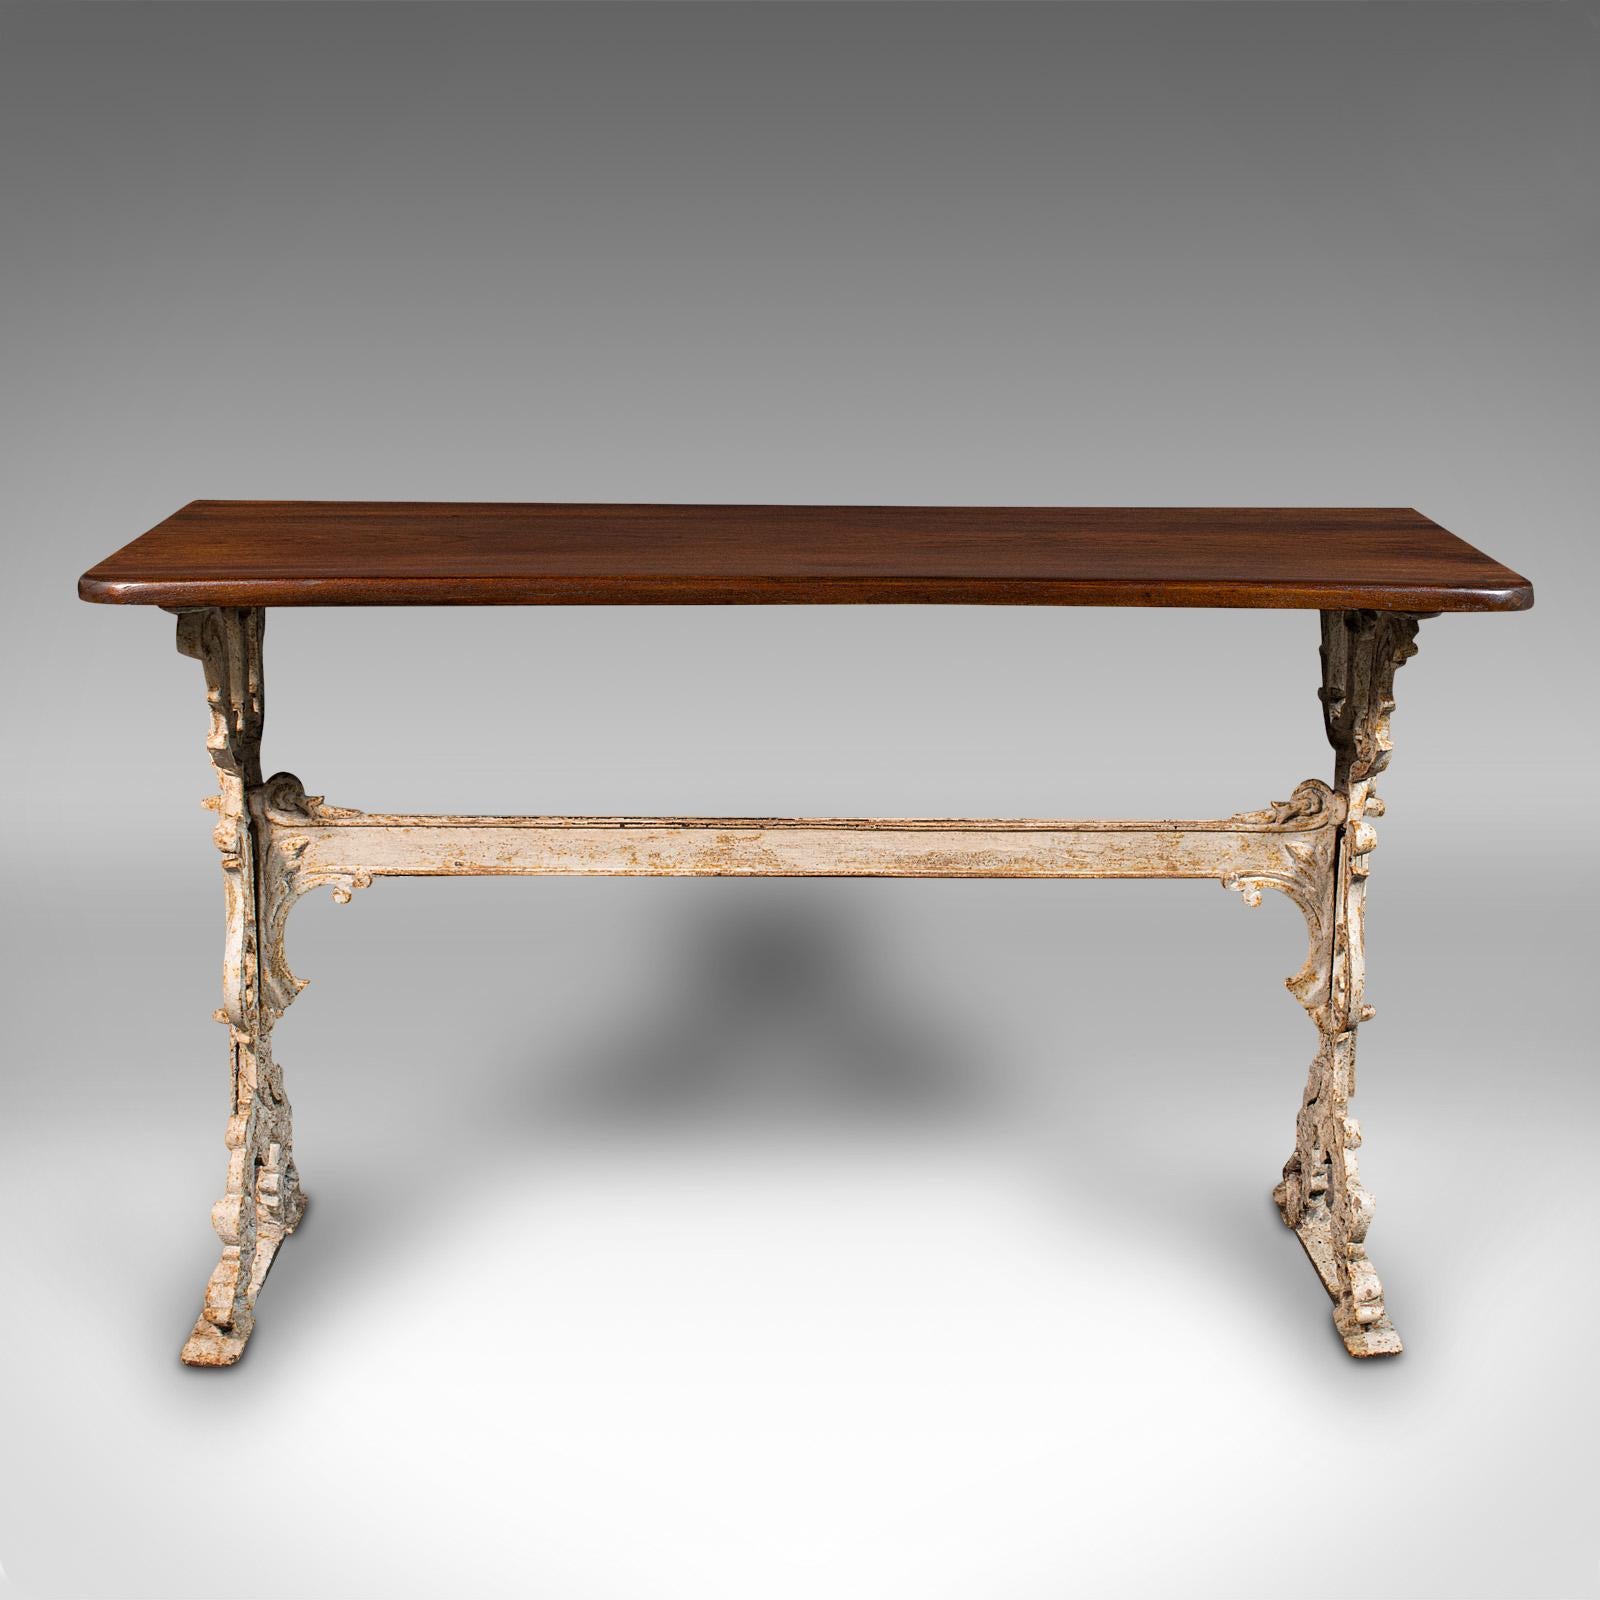 This is an antique orangery console table. An English, walnut and cast iron reception or side table, dating to the early Victorian period, circa 1850.

Grace your orangery or portico with this distinctive console table
Displays a desirable aged